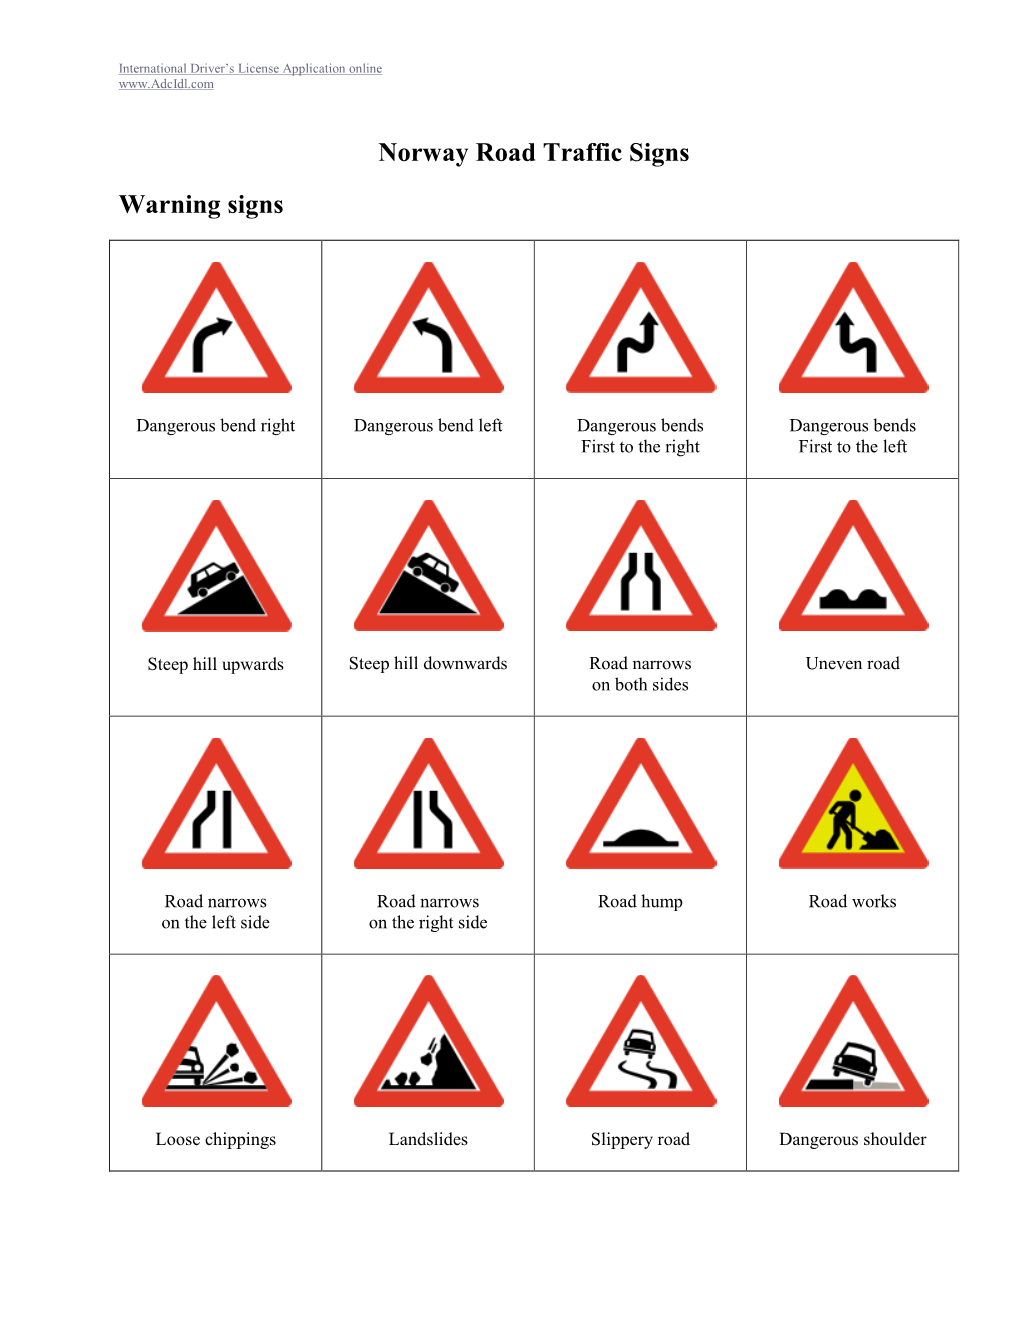 Norway Road Traffic Signs Warning Signs